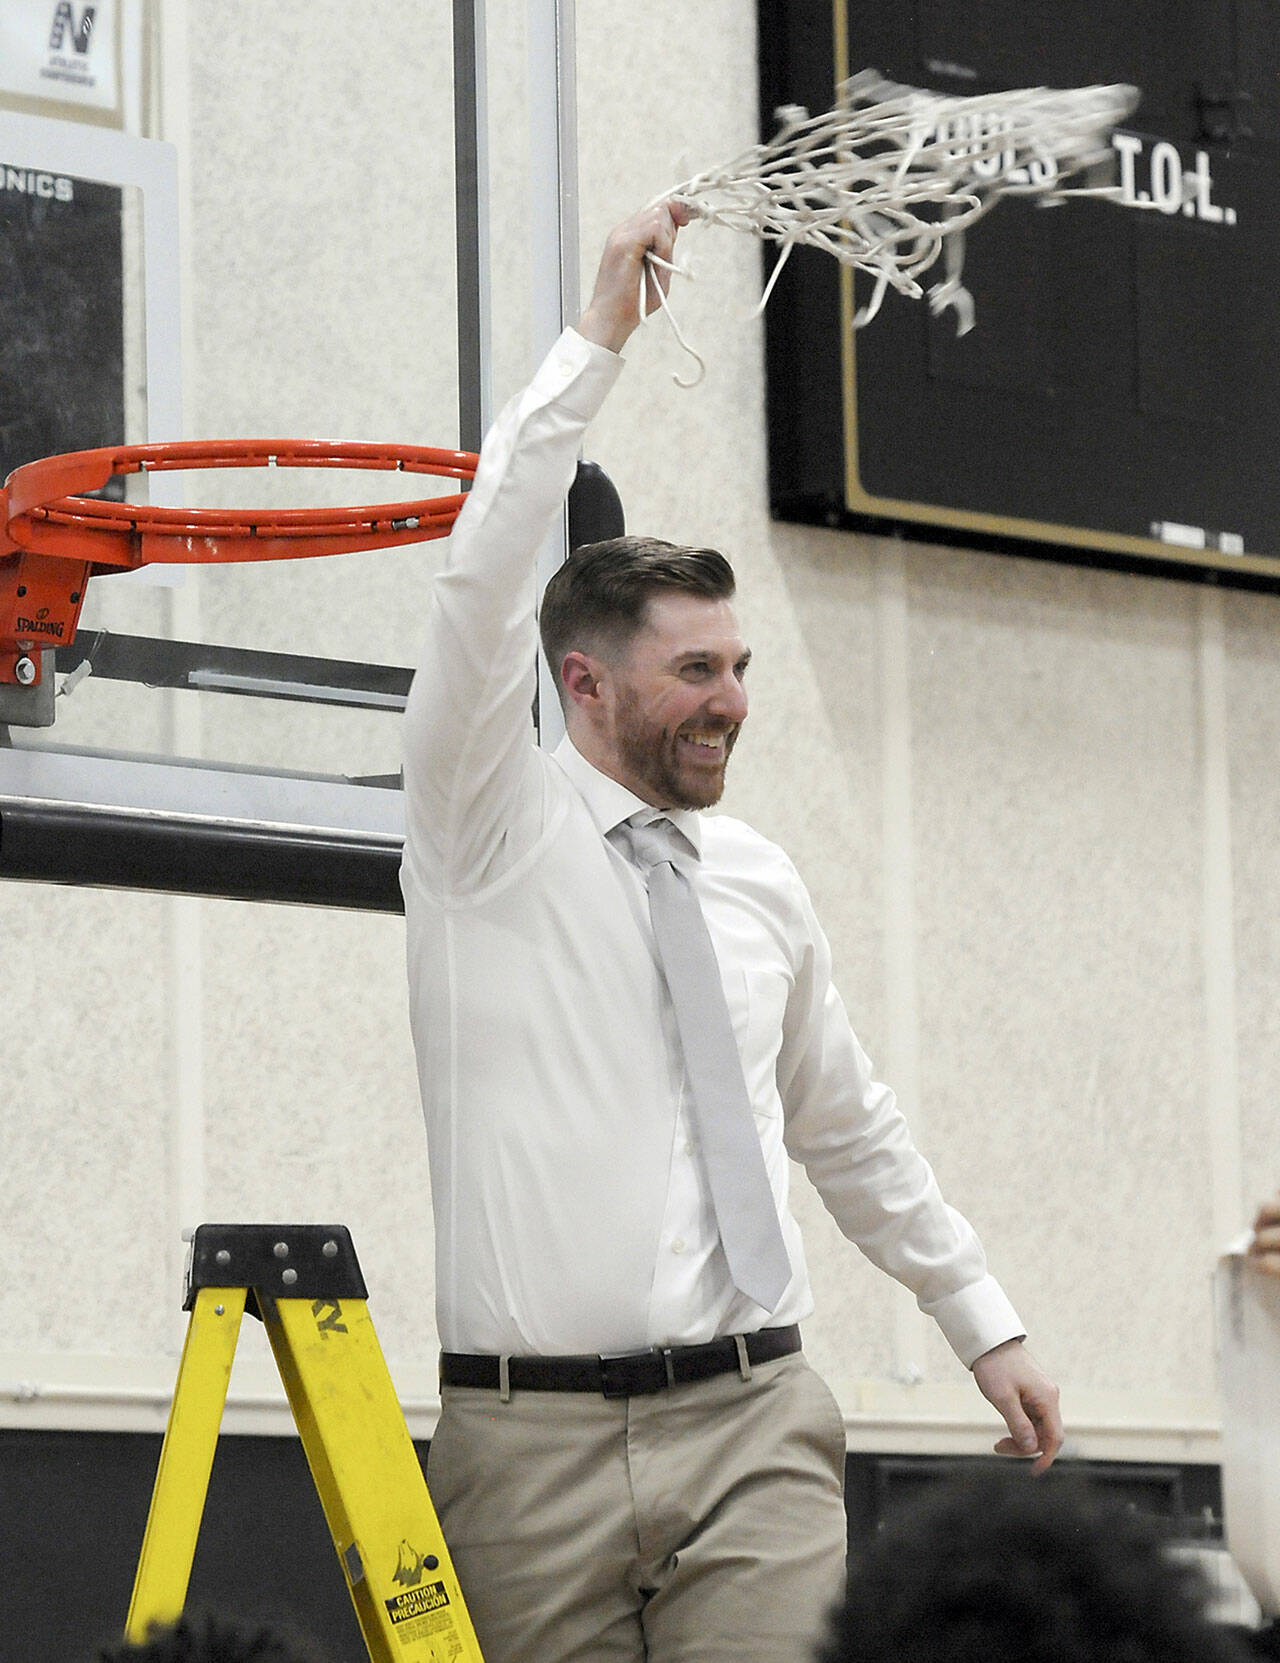 Donald Rollman, head coach of the Peninsula Pirates men’s team, waves a cut net in triumph after Peninsula clinched the NWAC North Region championship in February. (Keith Thorpe/Peninsula Daily News)